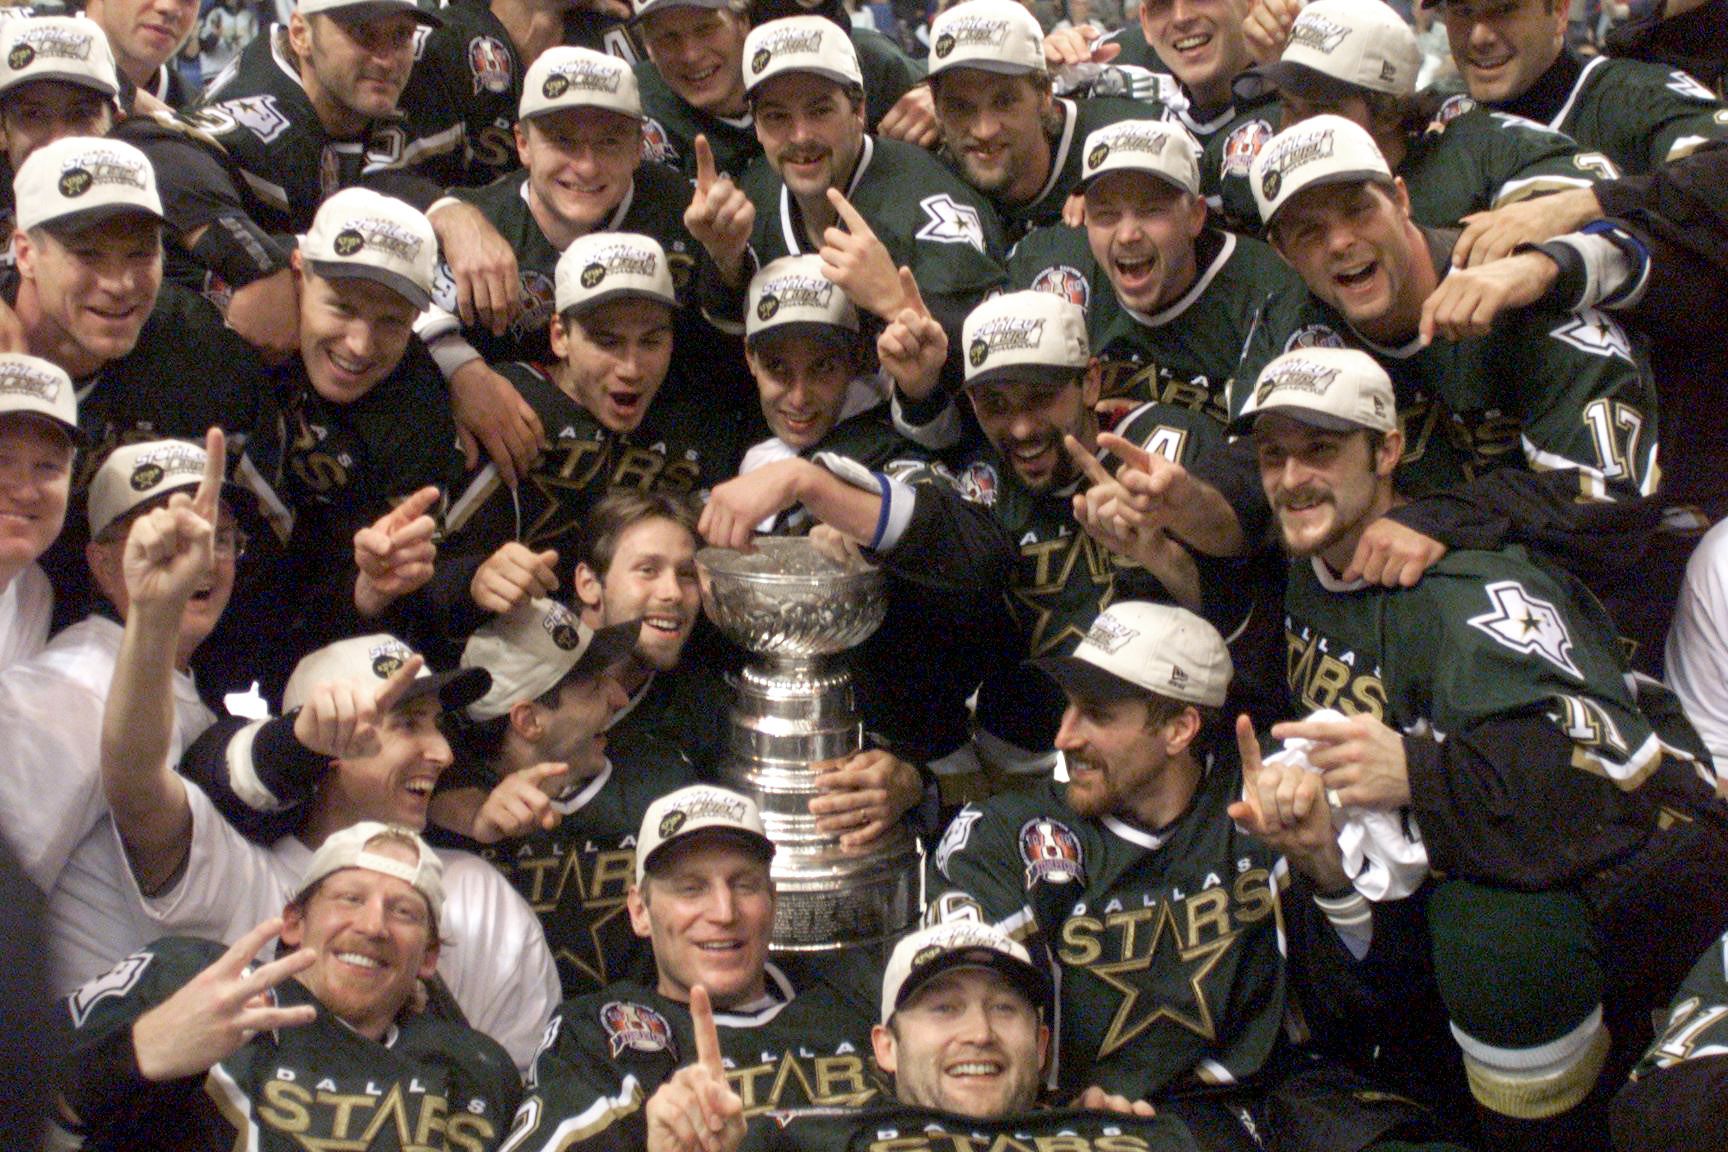 Today in photo history - 1999: Dallas Stars win Stanley Cup